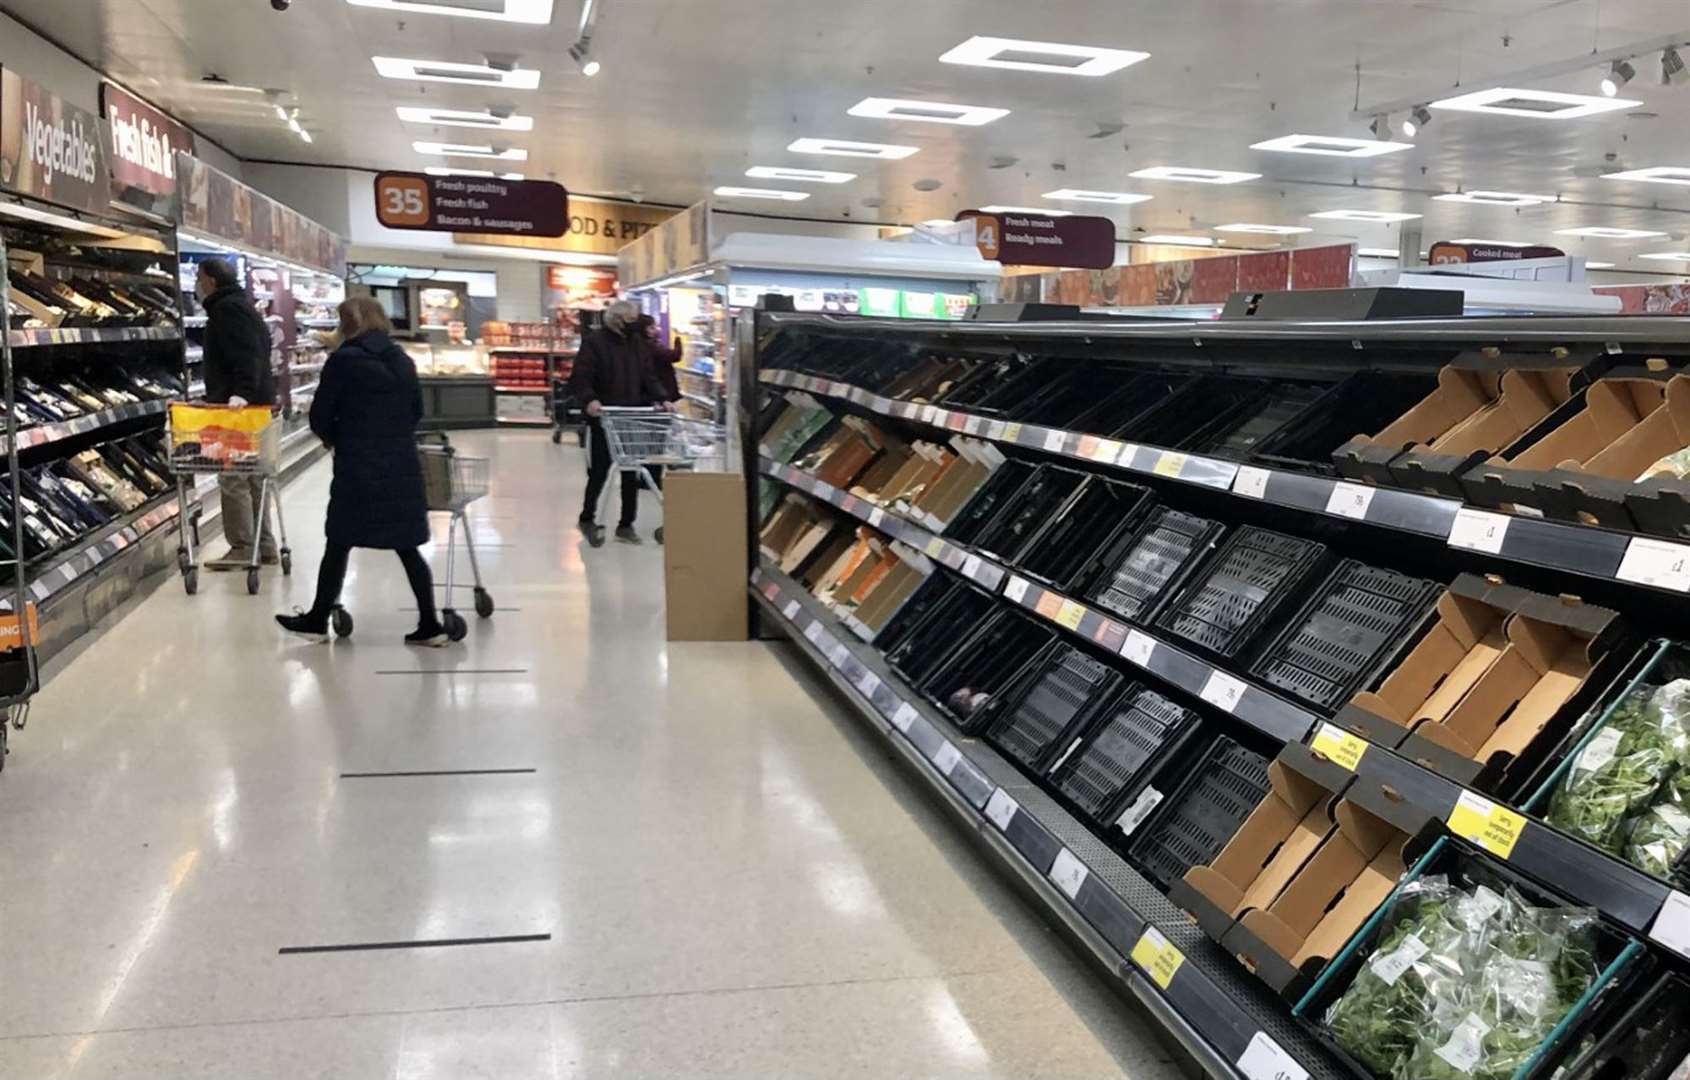 Depleted shelves in Sainsbury’s at the Forestside shopping centre in Belfast (David Young/PA)